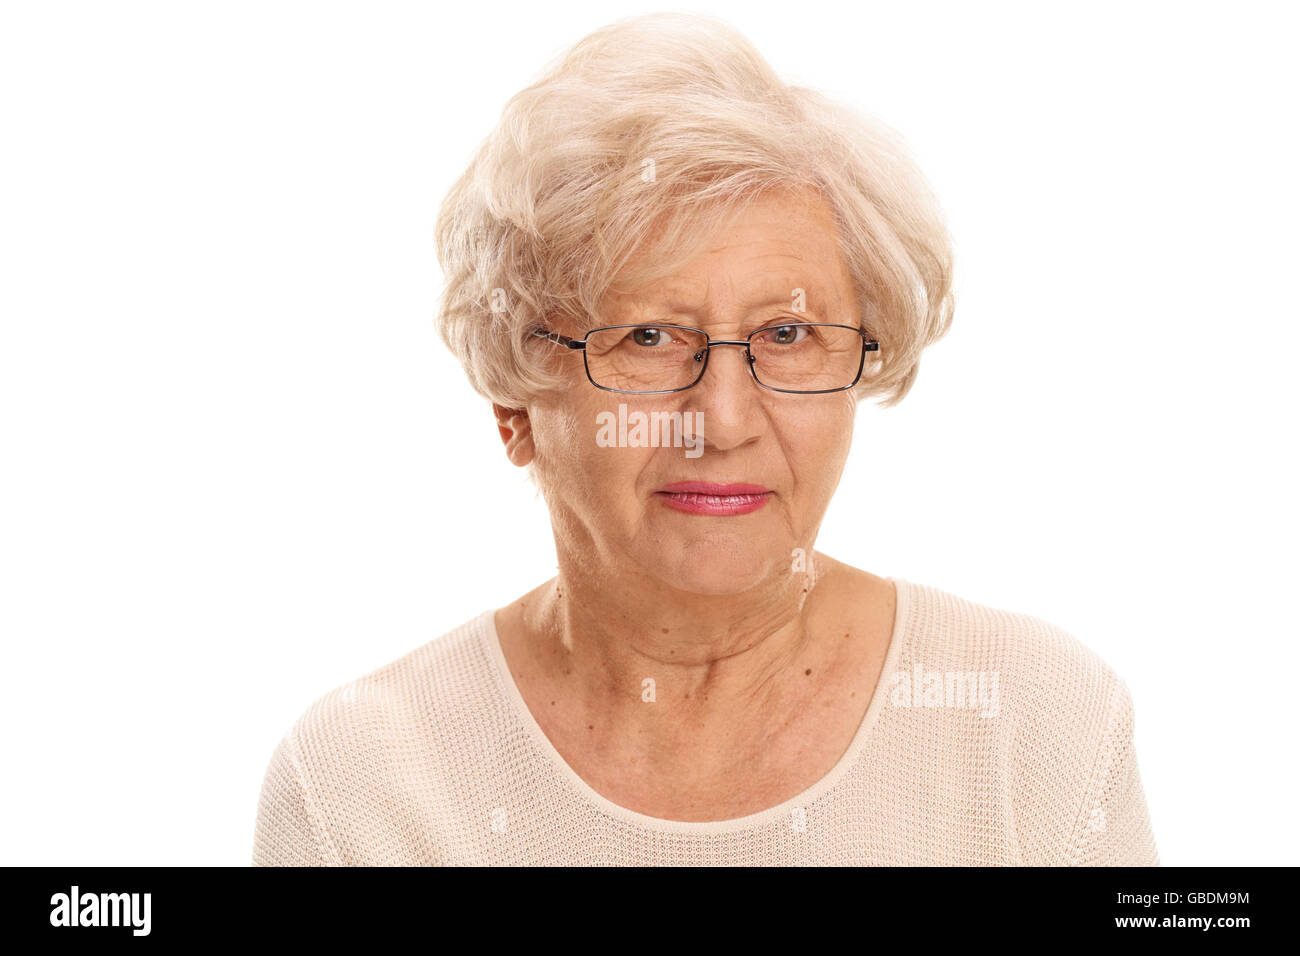 Close-up studio shot of an elderly lady with glasses isolated on white background Stock Photo